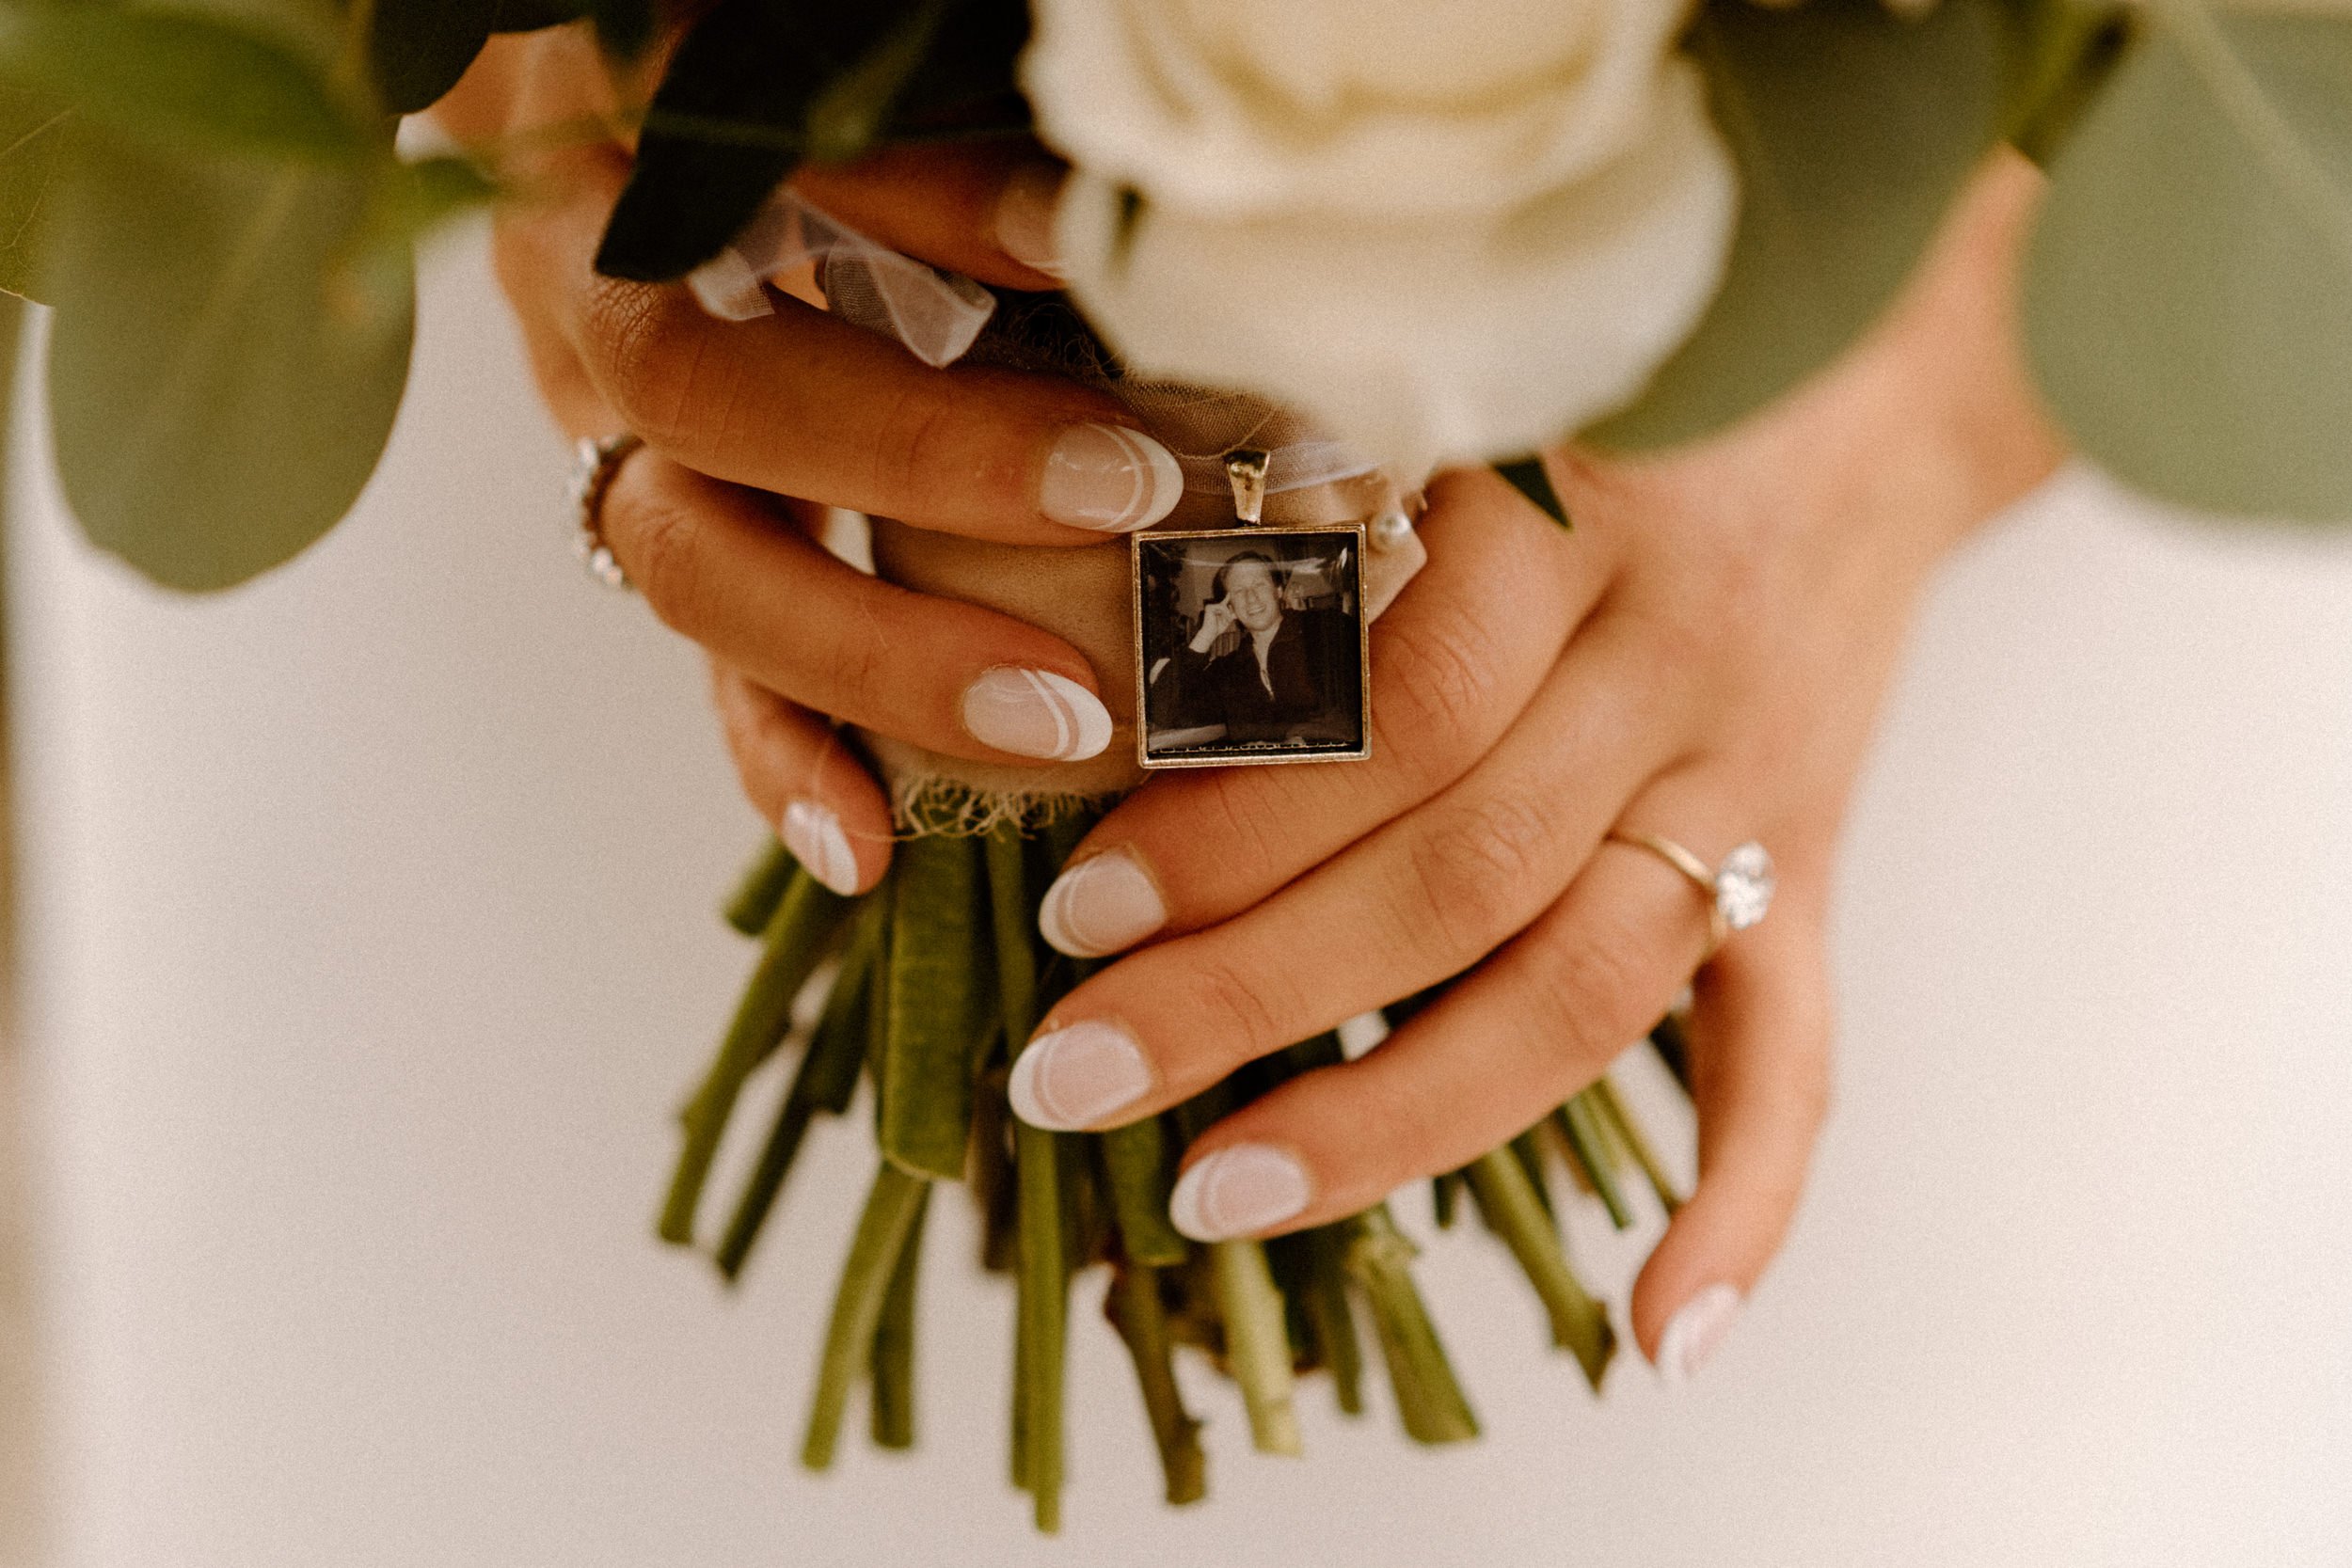 A small photo locket of a man hangs from the bride's bridal bouquet